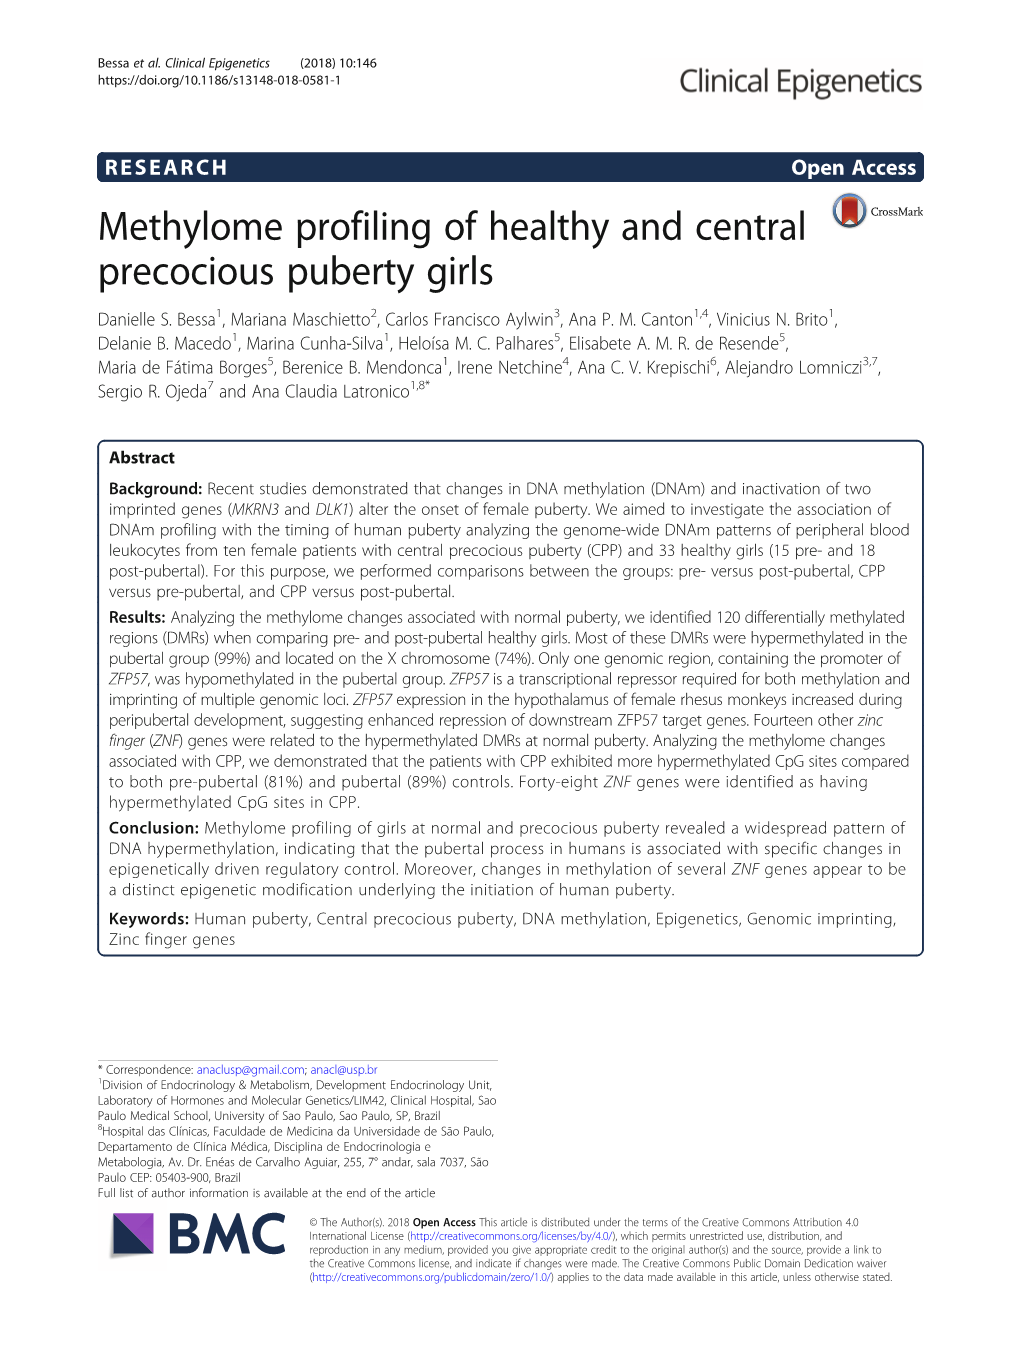 Methylome Profiling of Healthy and Central Precocious Puberty Girls Danielle S